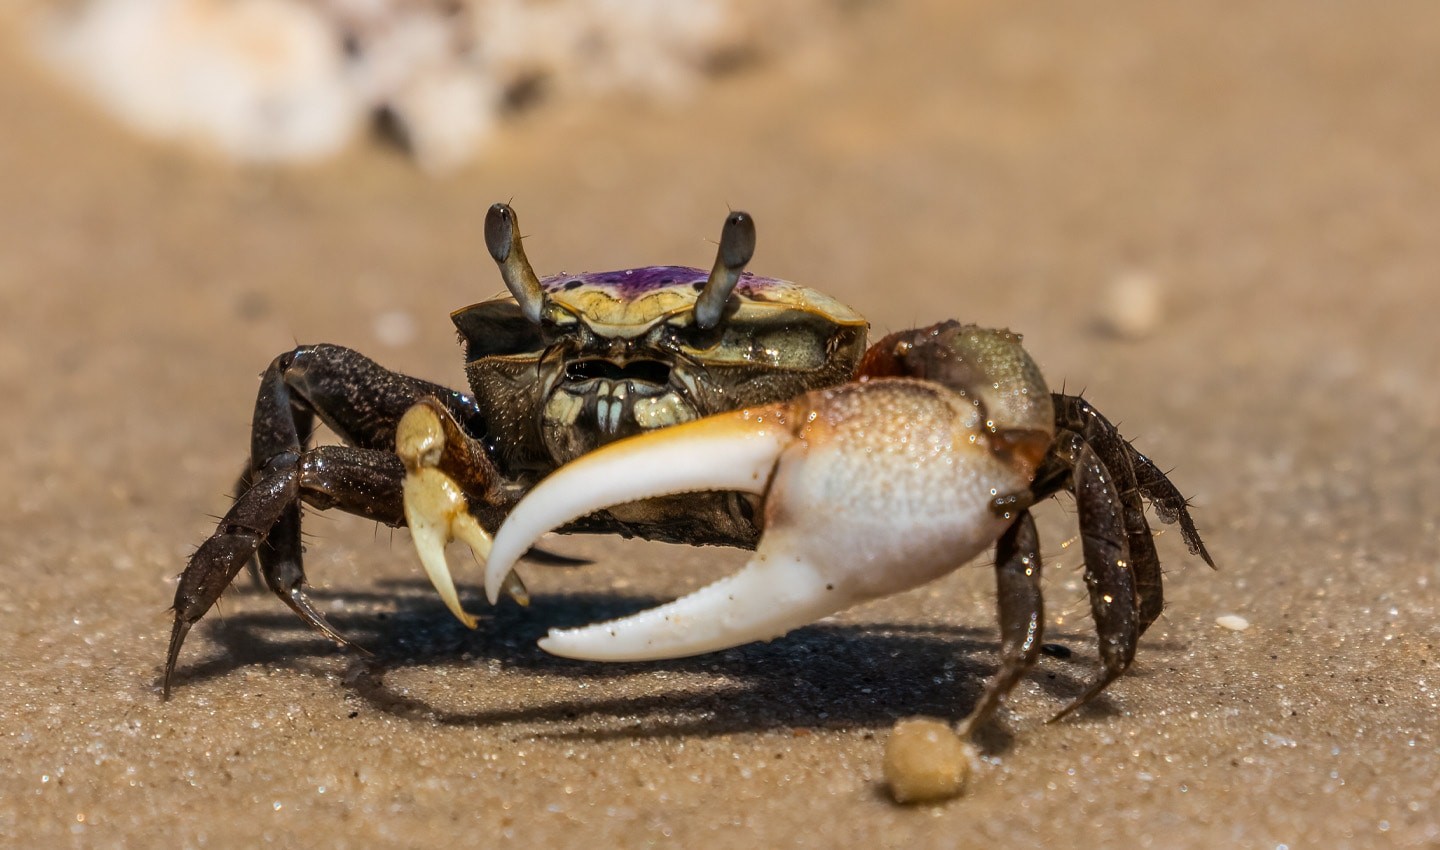 MIT researchers used the fiddler crab's eye as inspiration in developing this tech.